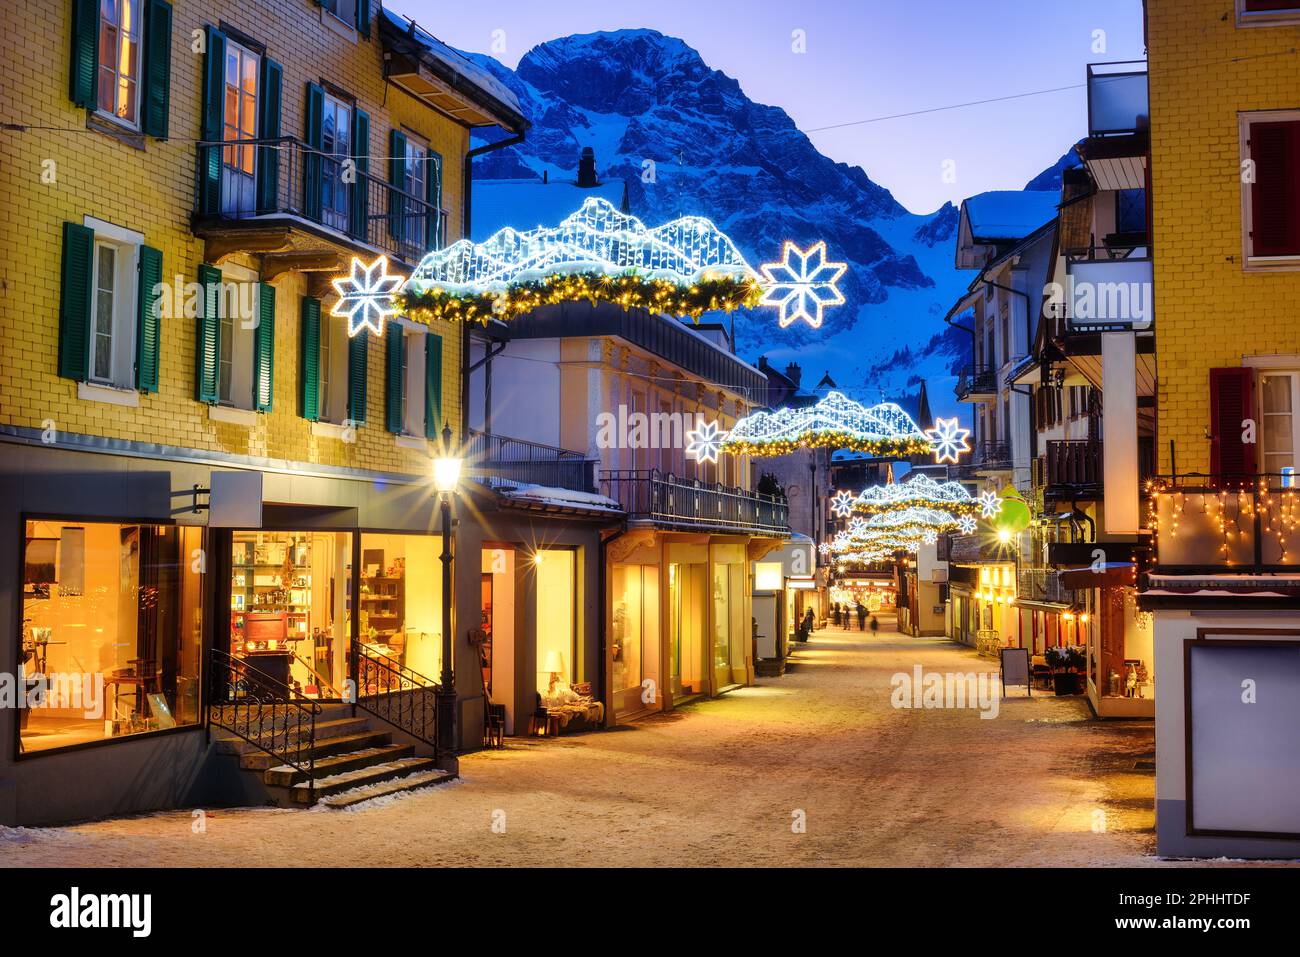 Christmas decorations on the streets of the Old town center of Engelberg village, a popular ski resort in Alps mountains, Central Switzerland Stock Photo